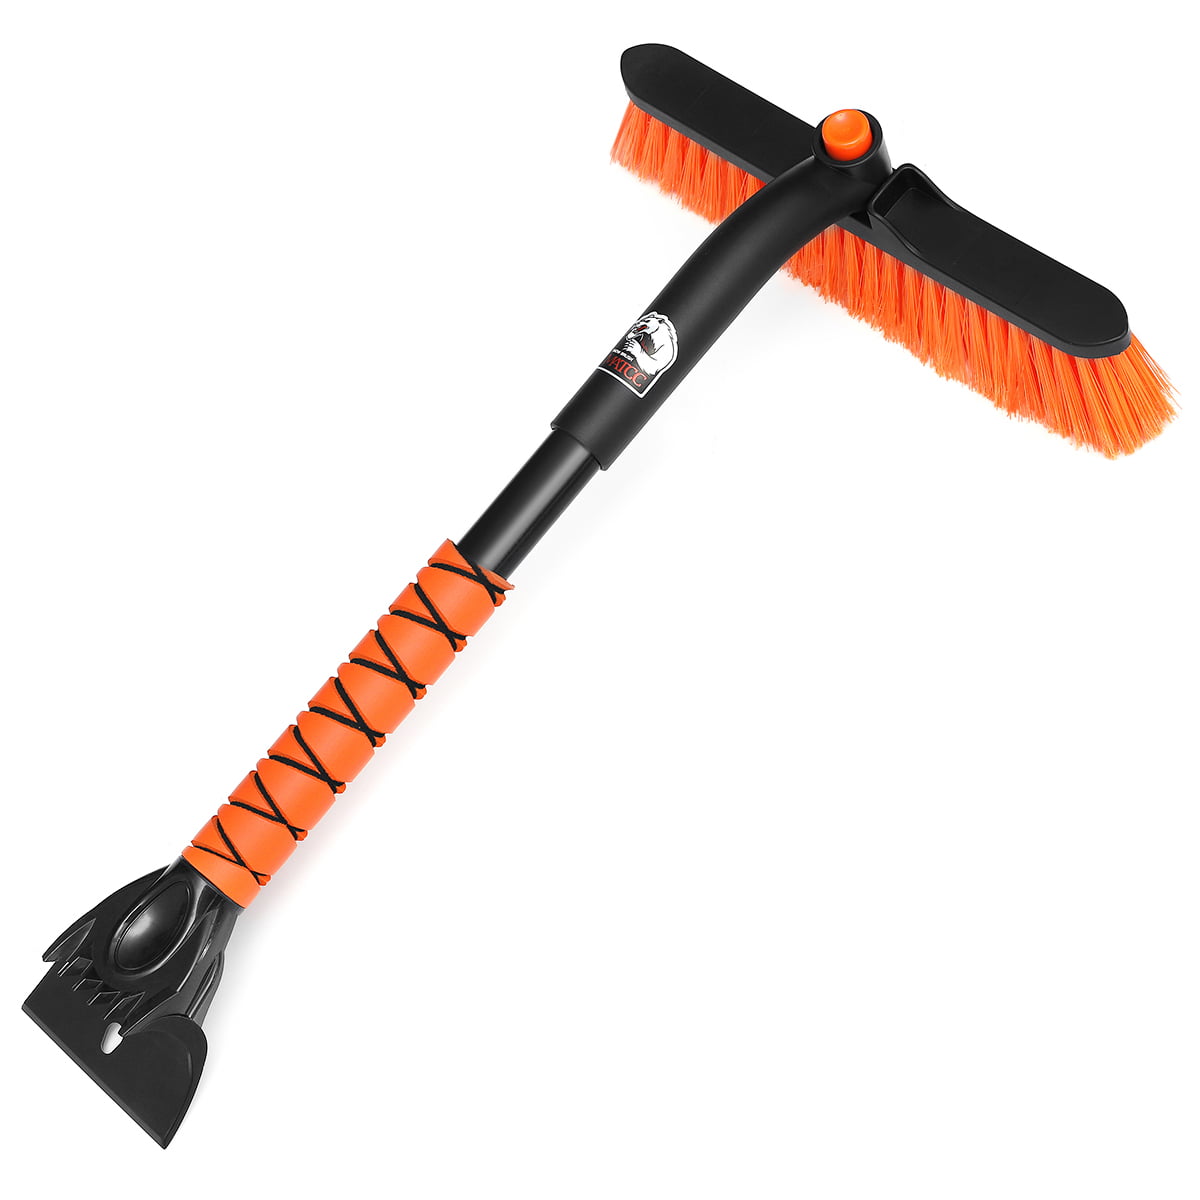 Black Details about   21 Inch ICE SCRAPPER With Brush,Snow Brush Cleaner Made in Turkey 